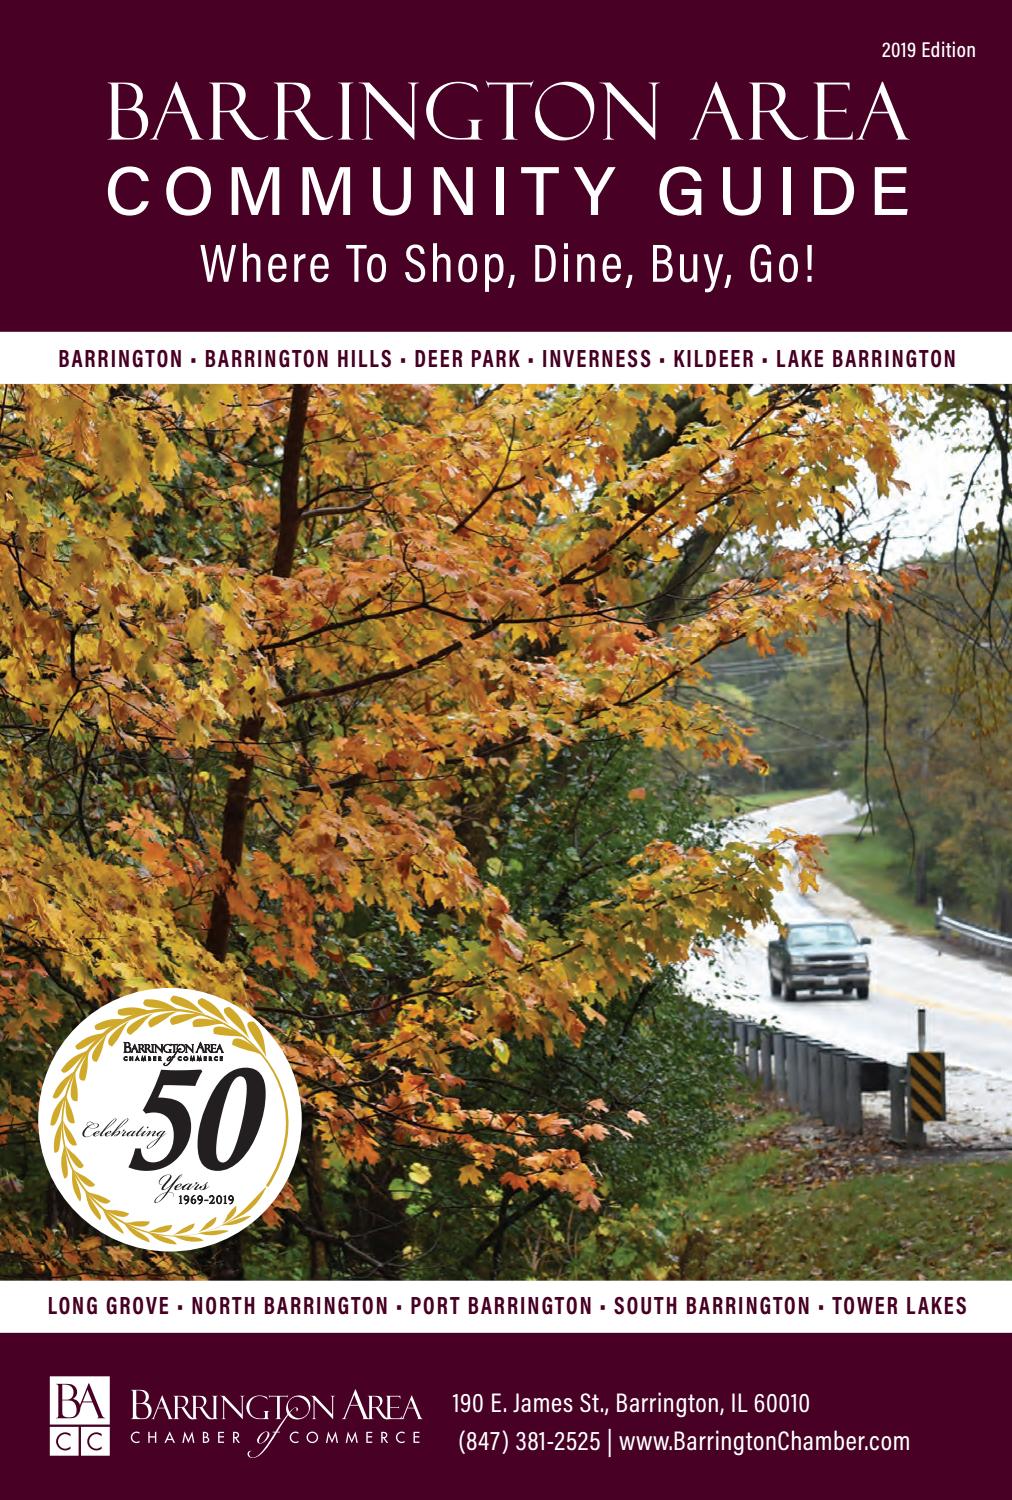 Fireplace Plus Vernon Hills Inspirational Barrington Il Munity Guide by town Square Publications